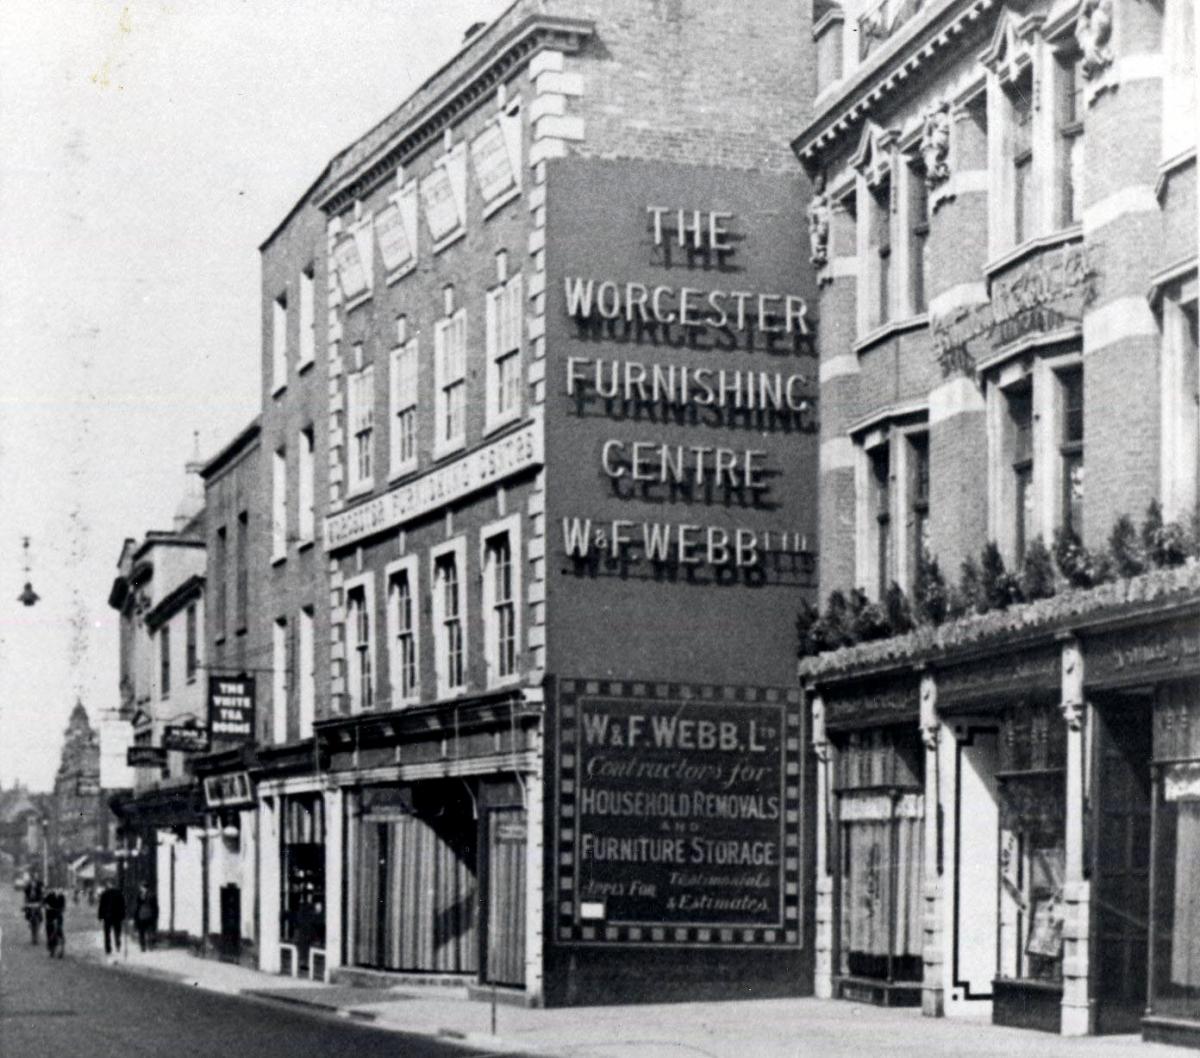 the premises of the Worcester Furnishing Centre at the south end of a row of shops pulled down in the 1920s and 1930s